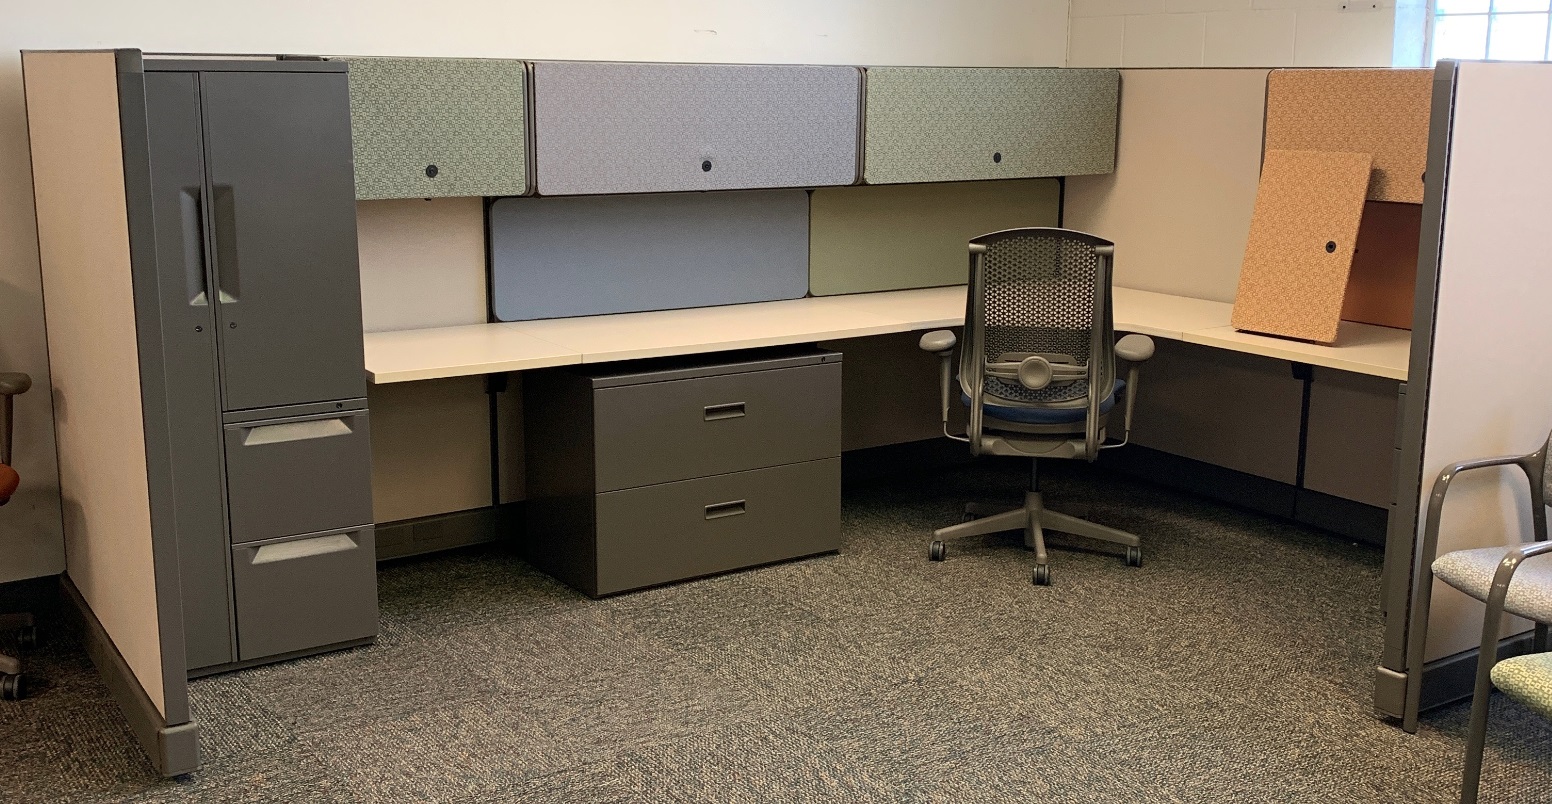 Details about   Herman Miller AO2 6' x 6' Cubicles Blue 